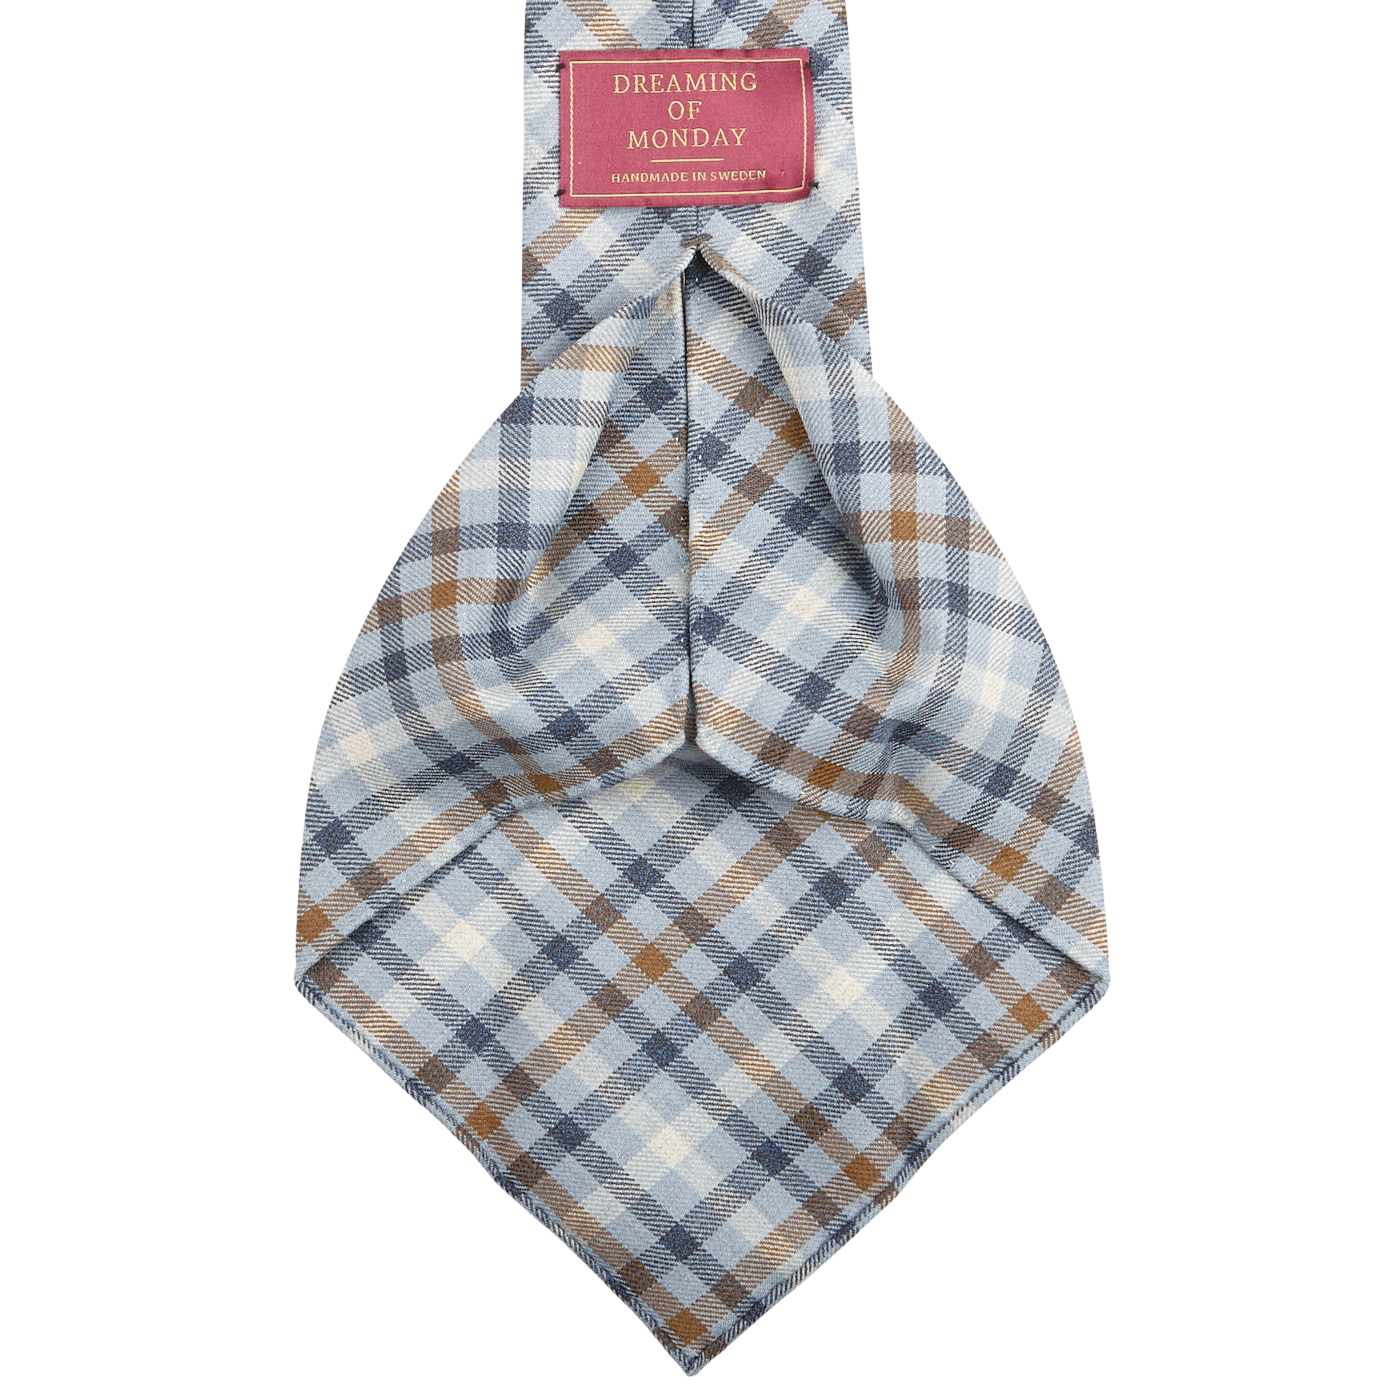 Dreaming of Monday Light Blue Gunclub Checked 7-Fold Wool Tie Open